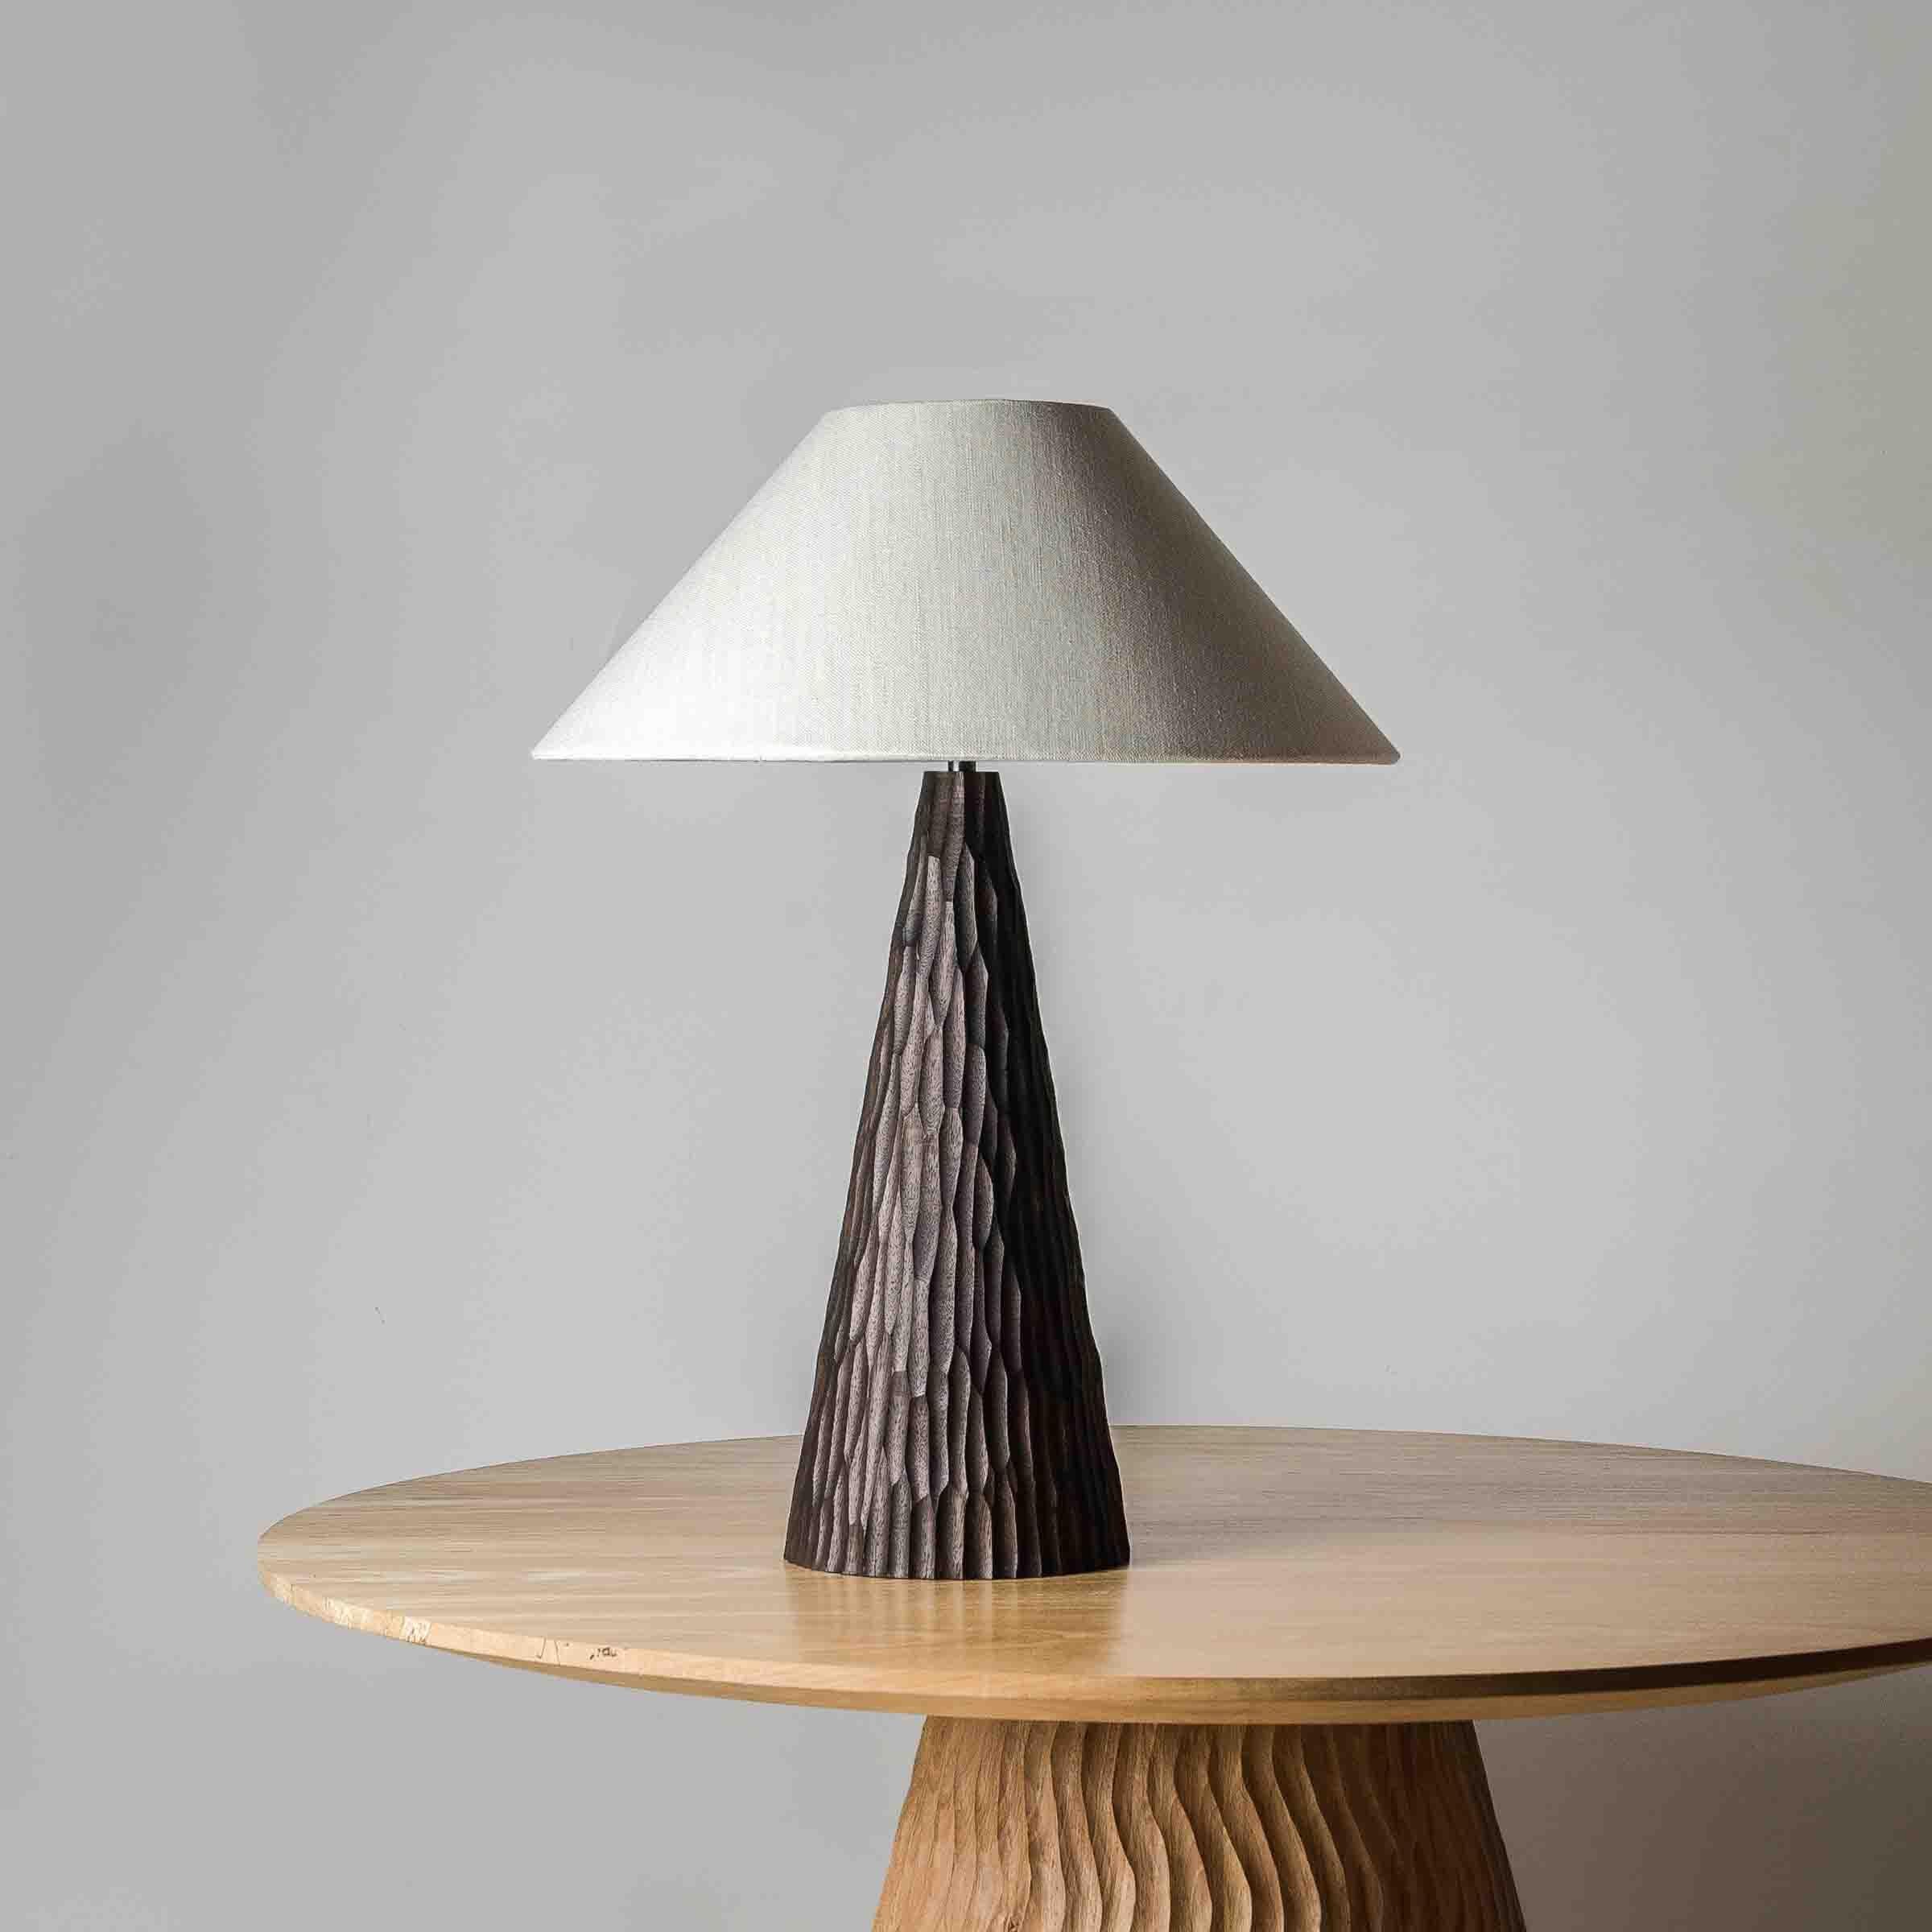 The Indra table lamp - black pairs a sculptural wooden base with a steeply angled lampshade, that diffuses light downwards to create a cosy setting.

The conical base is turned and carved by hand from solid ash, and stained black.

The shade is